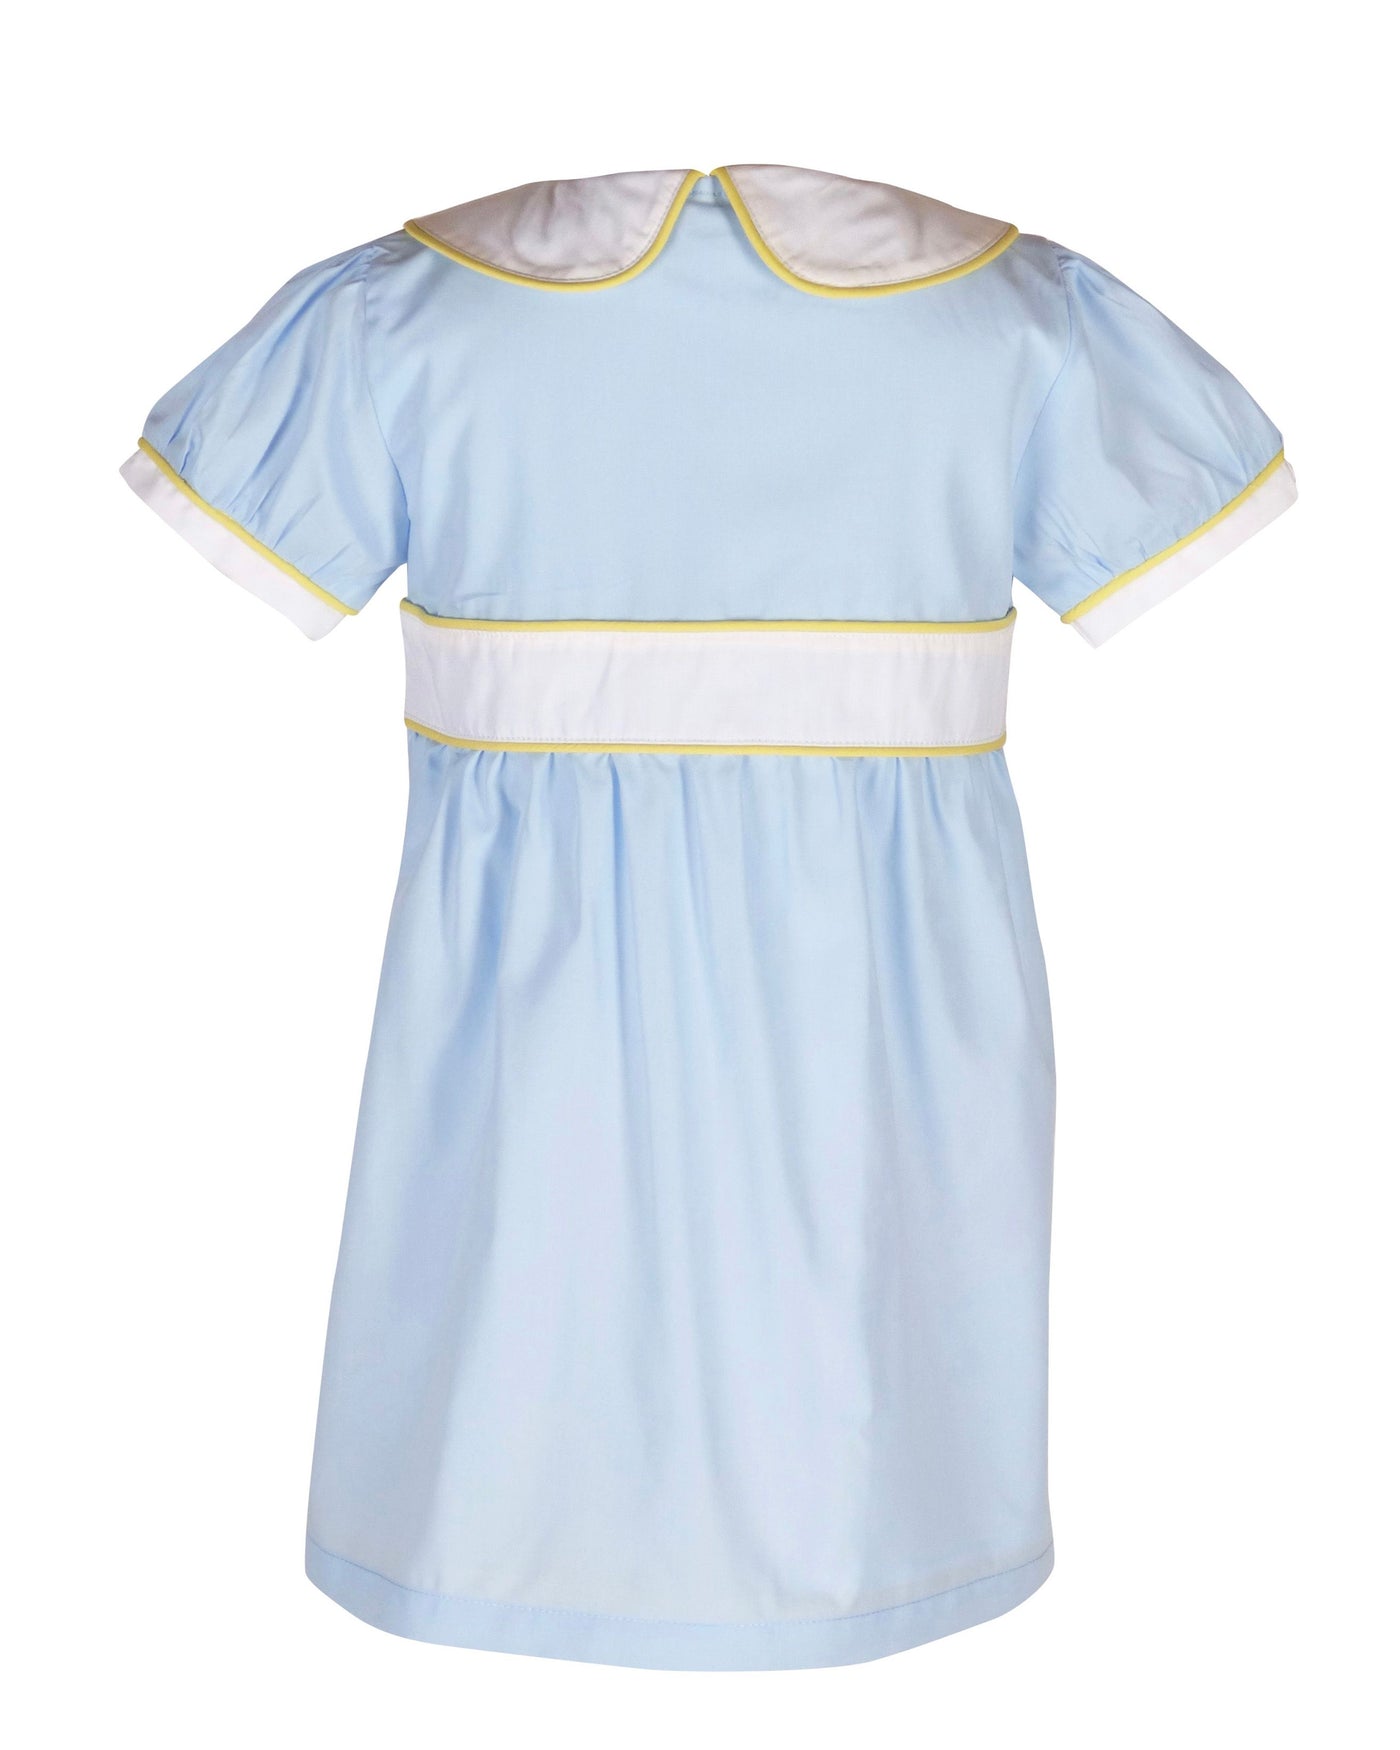 Avery Dress with Puddle Duck Embroidery - Mumzie's Children